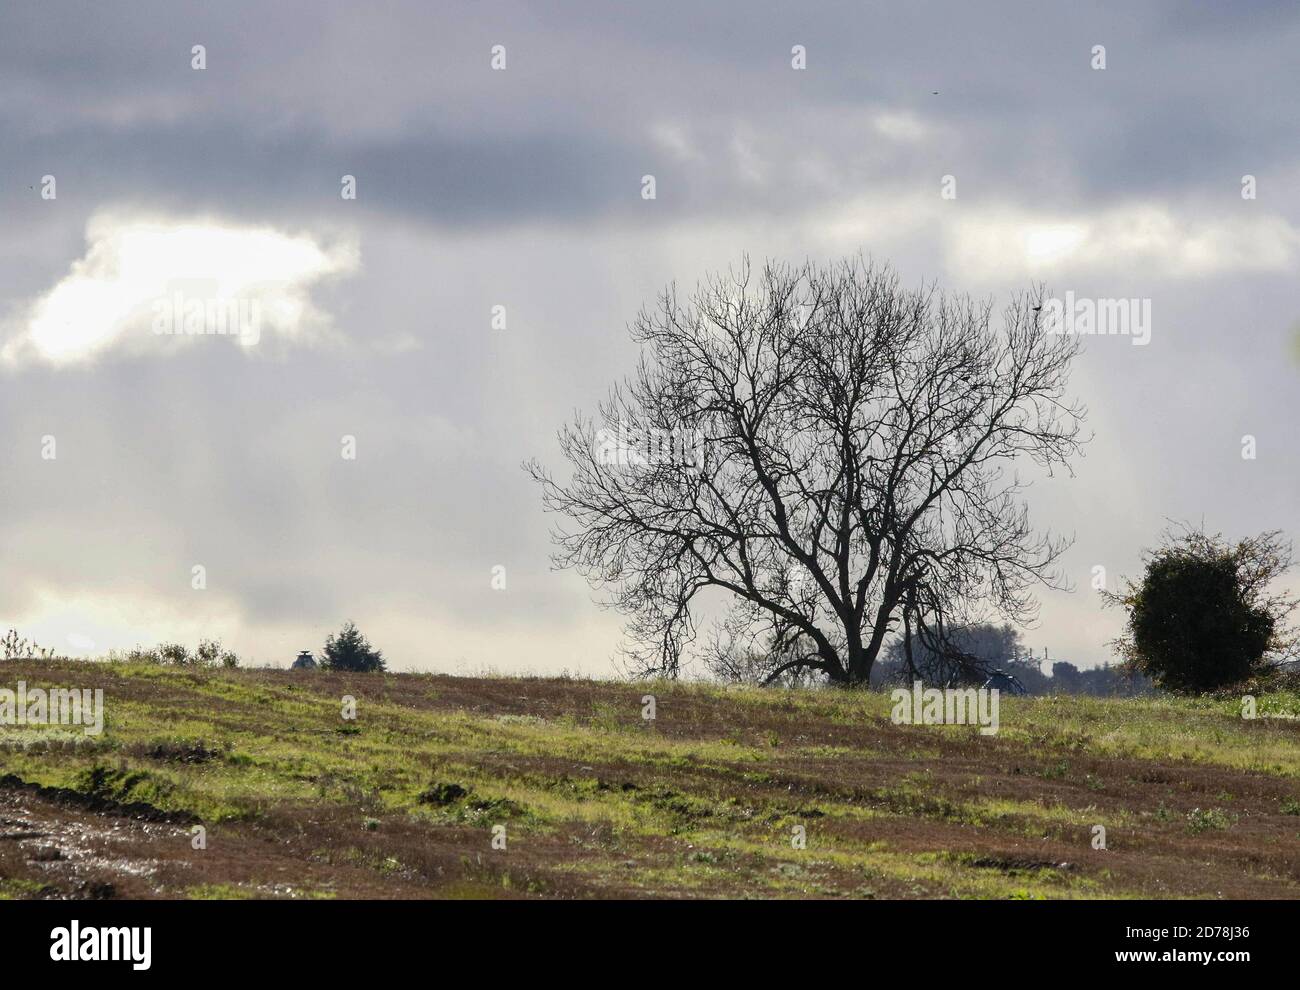 Magheralin, County Armagh, Northern Ireland. 21 Oct 2020. UK weather: sunny spells with sharp heavy showers sweeping through on an increasing westerly breeze. Credit: CAZIMB/Alamy Live News. Stock Photo